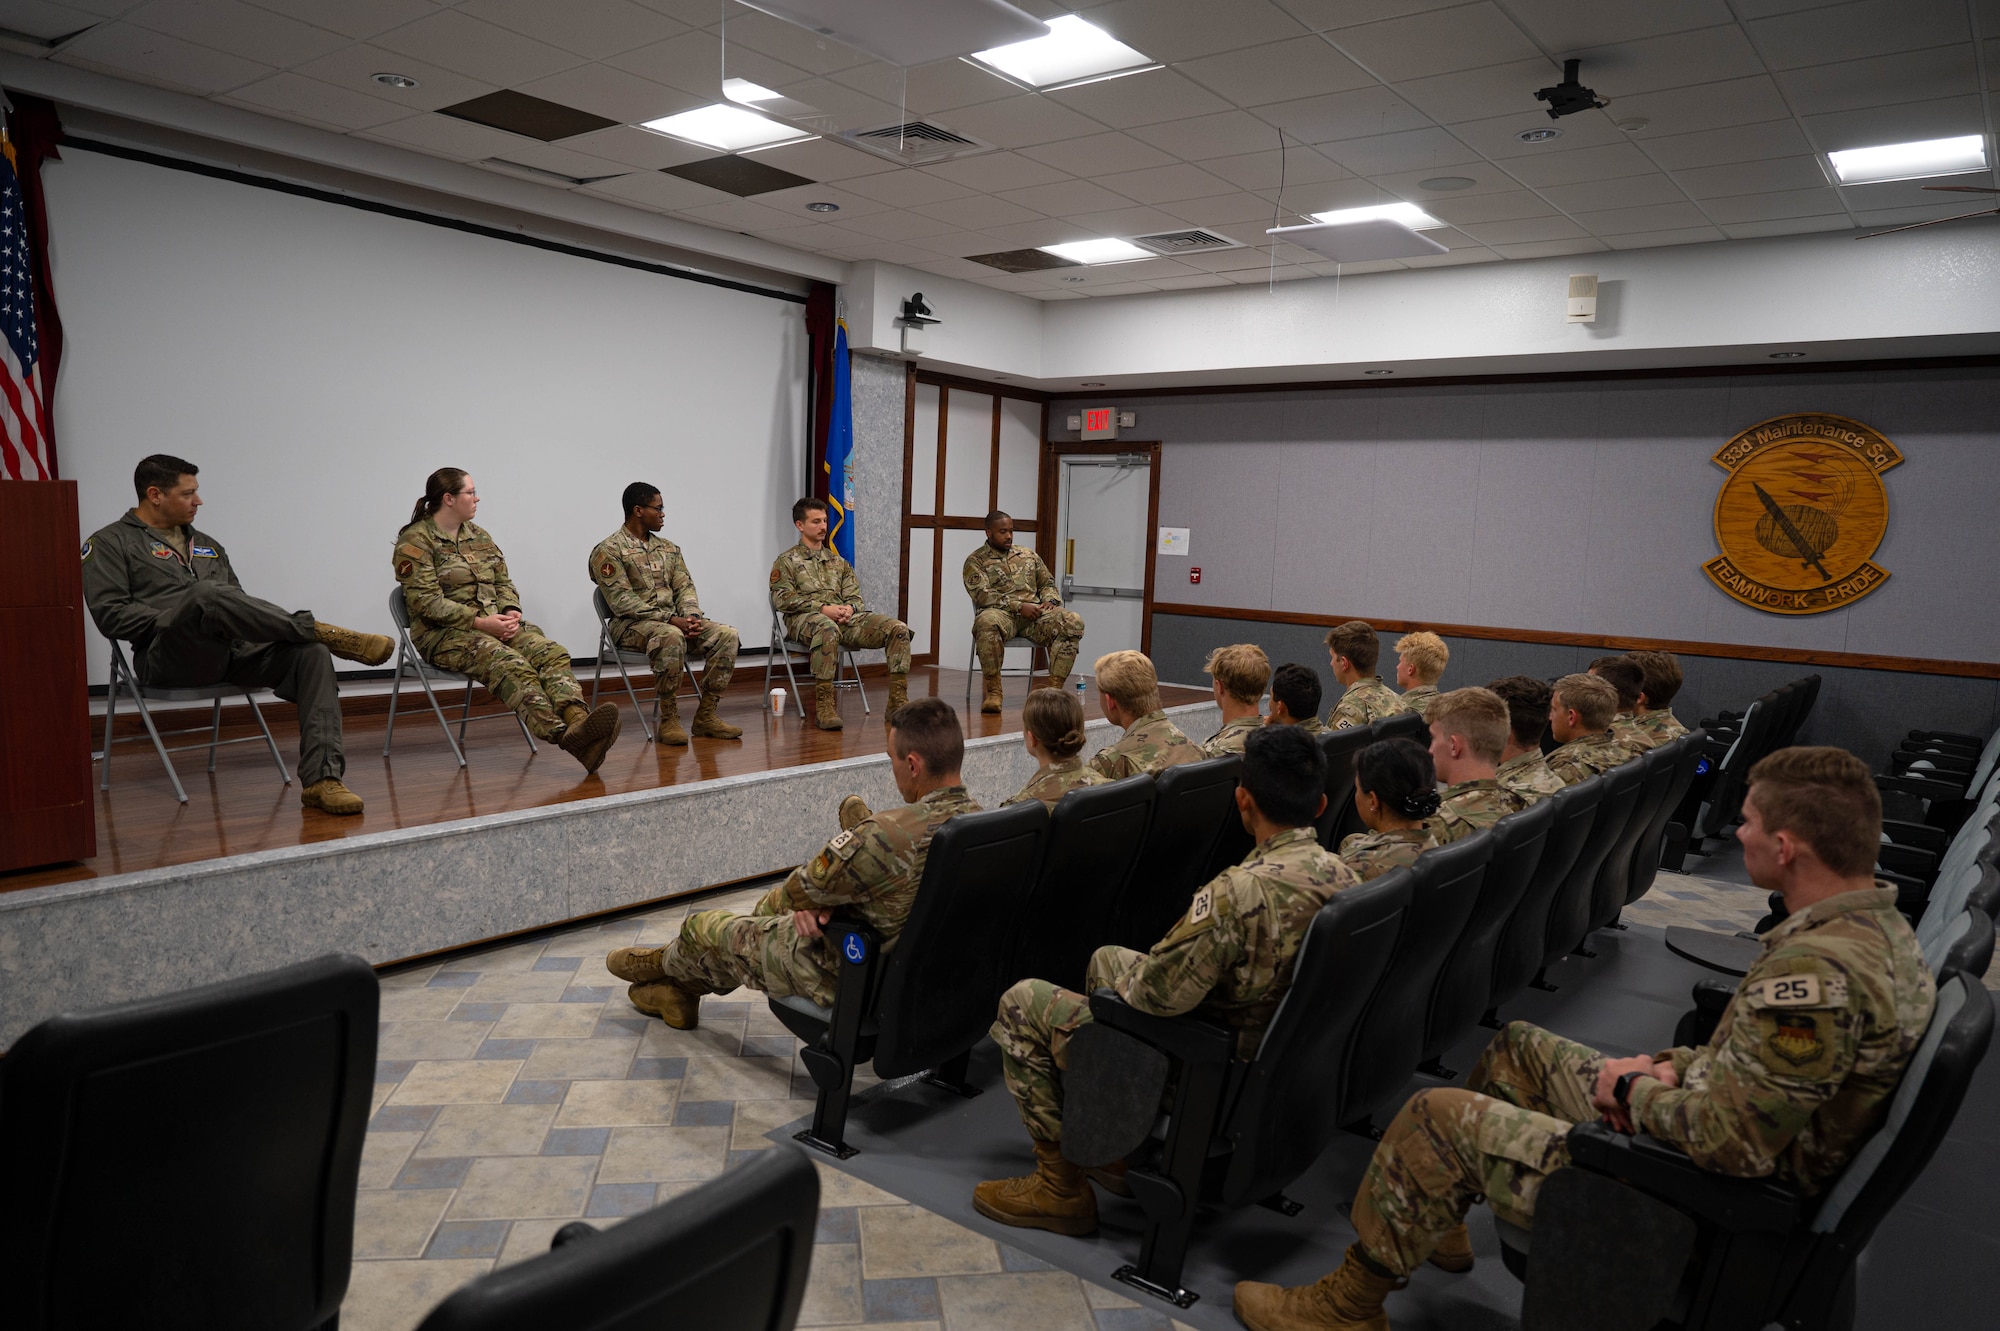 Officers from the 350th Spectrum Warfare Wing host an officer panel for visiting U.S. Air Force Academy cadets during a visit at Eglin Air Force Base, Fla., June 20, 2023. The panel assembled from squadrons across the wing, discussed the day-to-day responsibilities of officers, offered guidance on career paths, and highlighted the various mission opportunities available while shedding light on the world of electronic warfare and its role in achieving air supremacy. (U.S. Air Force photo by 1st Lt. Benjamin Aronson)